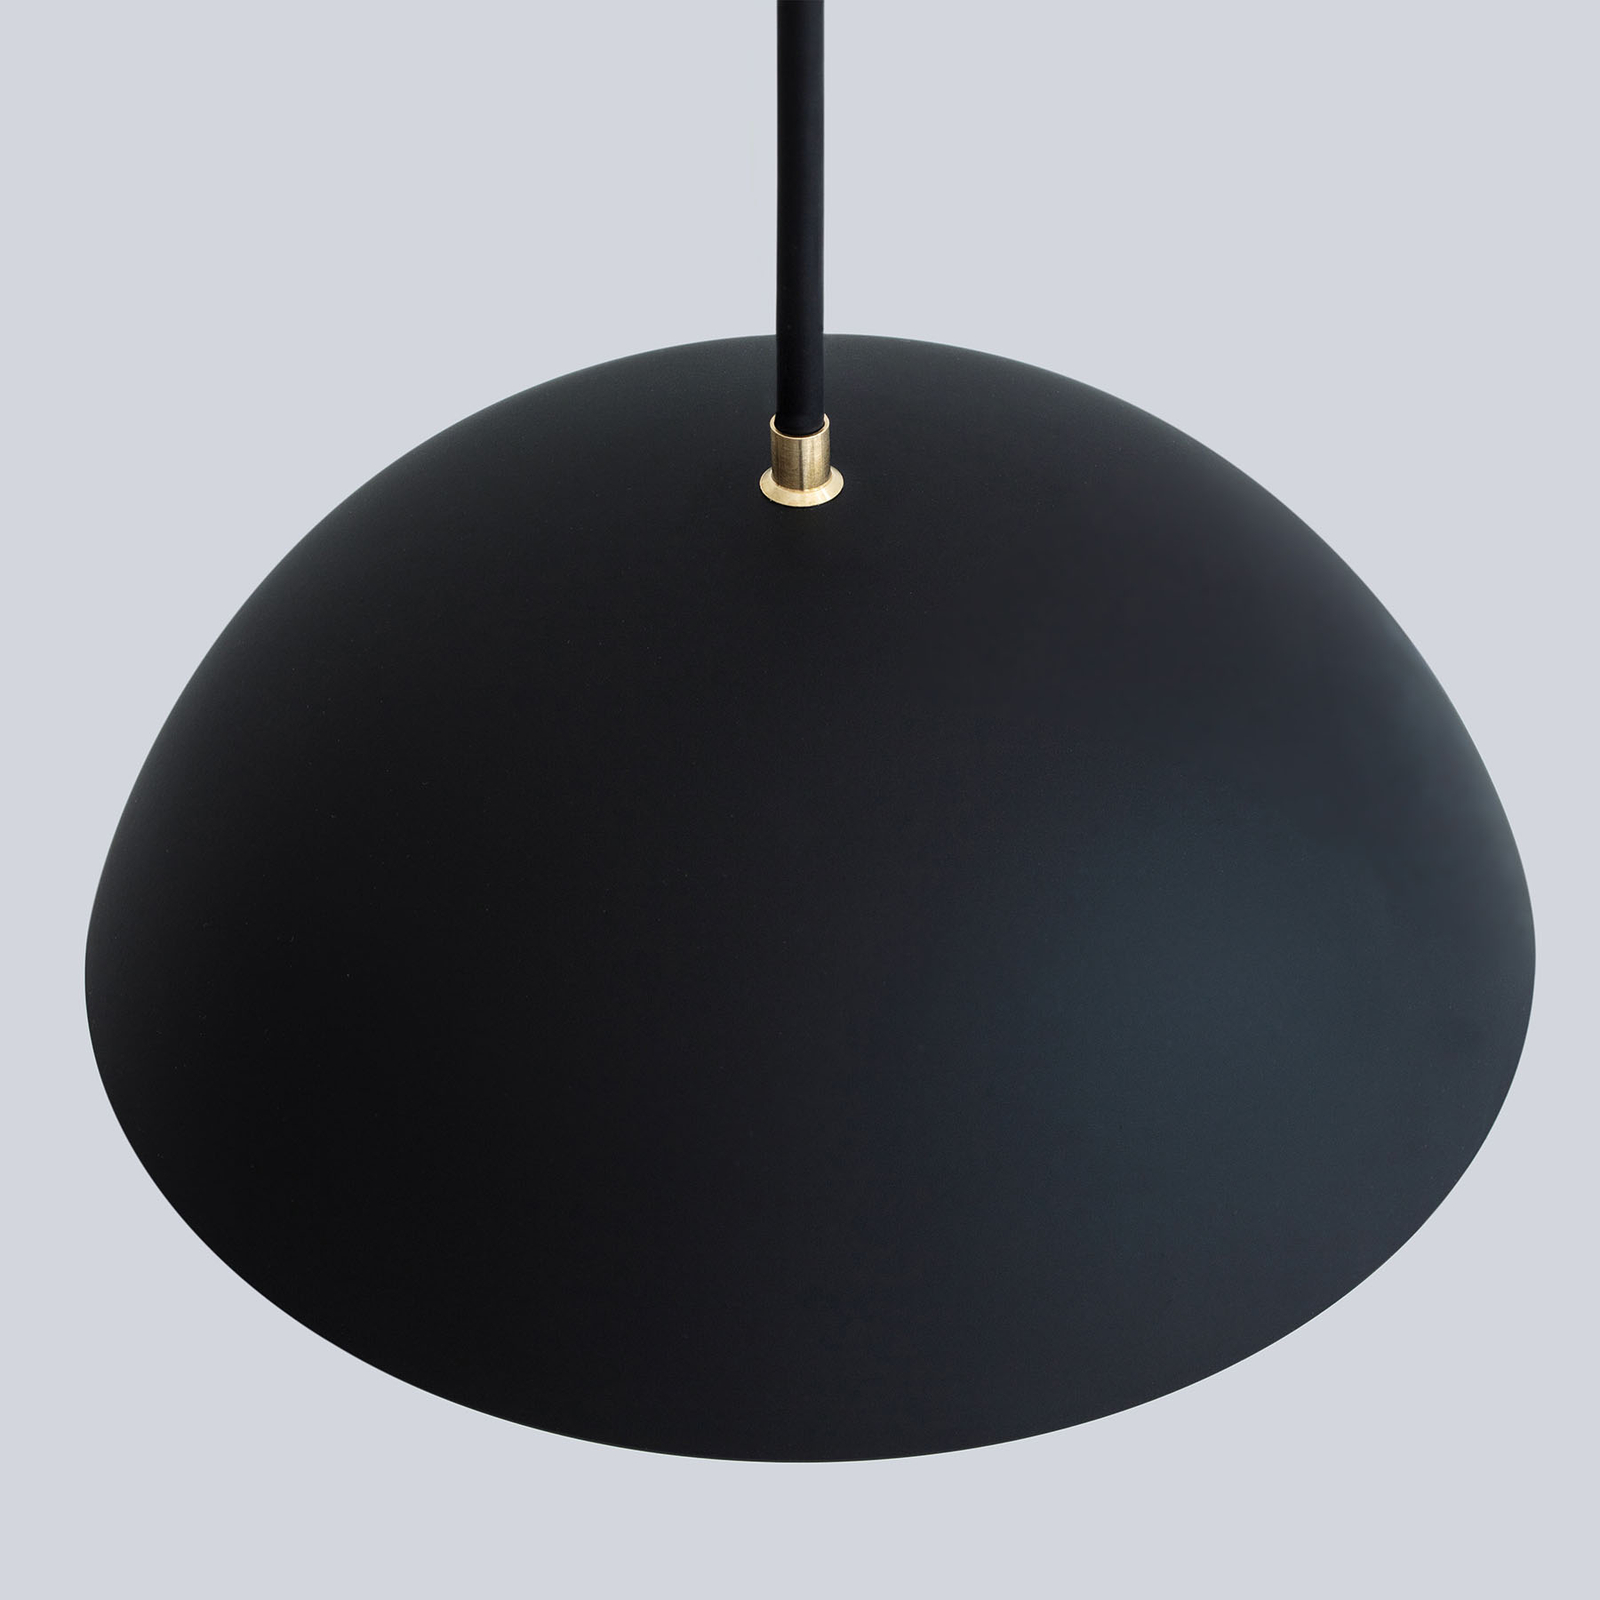 Nyta Pong Ceiling LED pendant light, cable length 3m